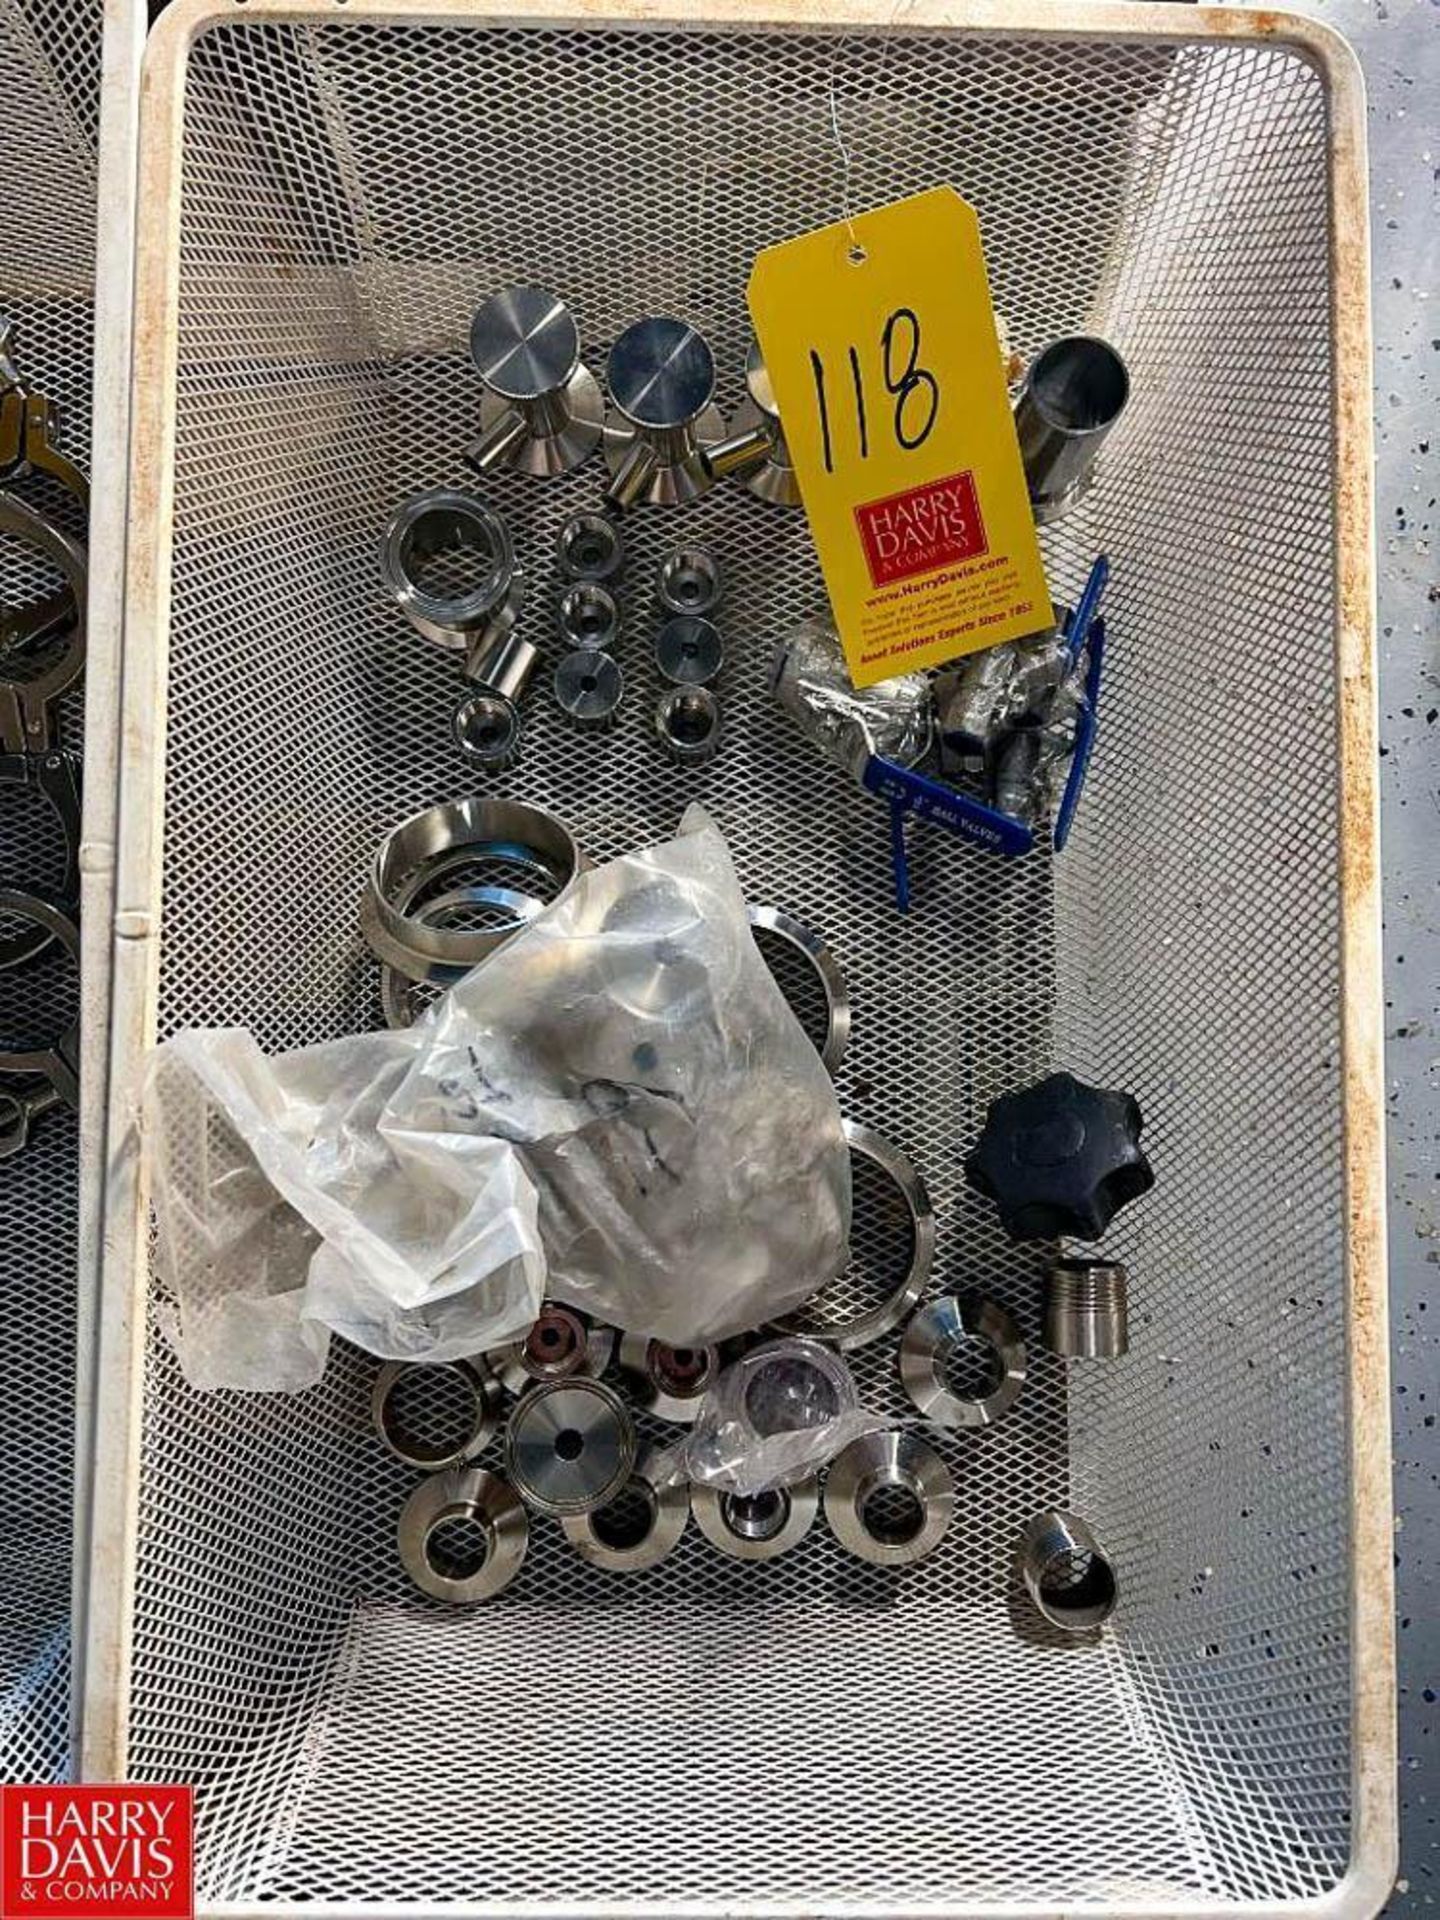 NEW Assorted S/S Ball Valves, Weld Ferrules and Fittings - Rigging Fee: $25